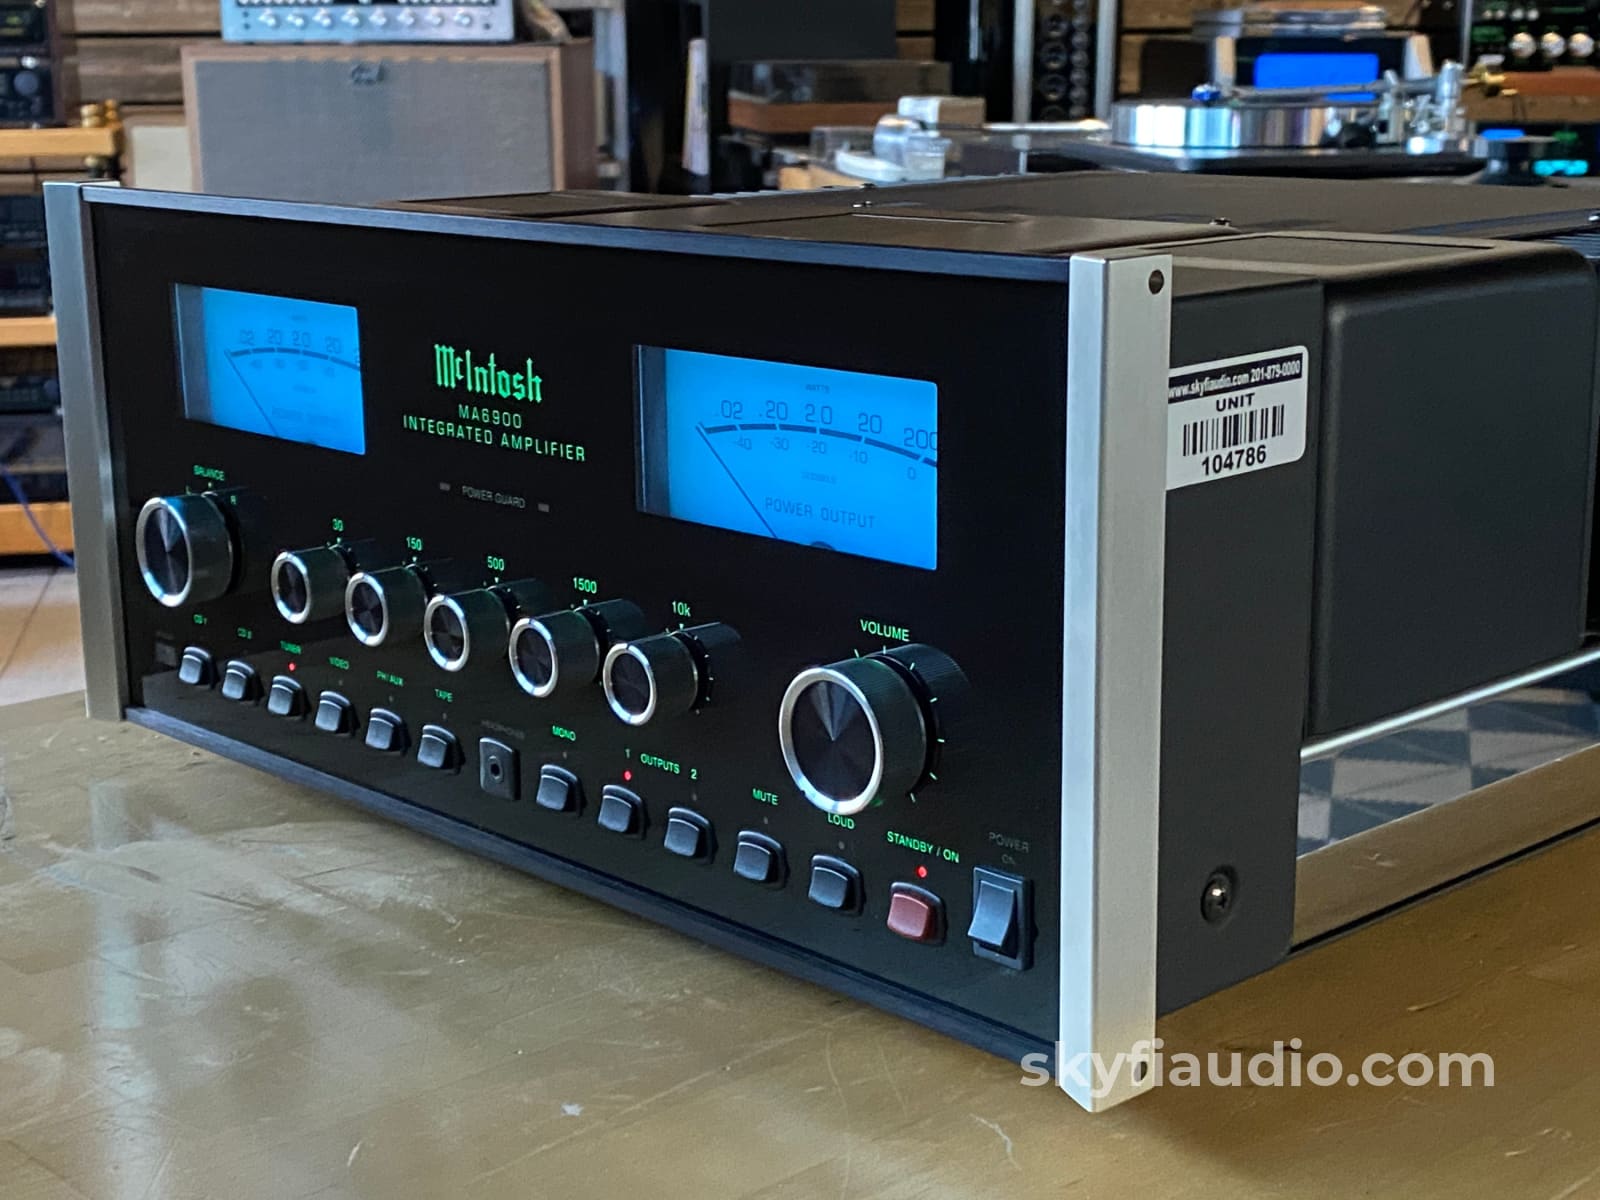 Mcintosh Ma6900 Integrated Amplifier - All Analogue With Built In Phono And Eq